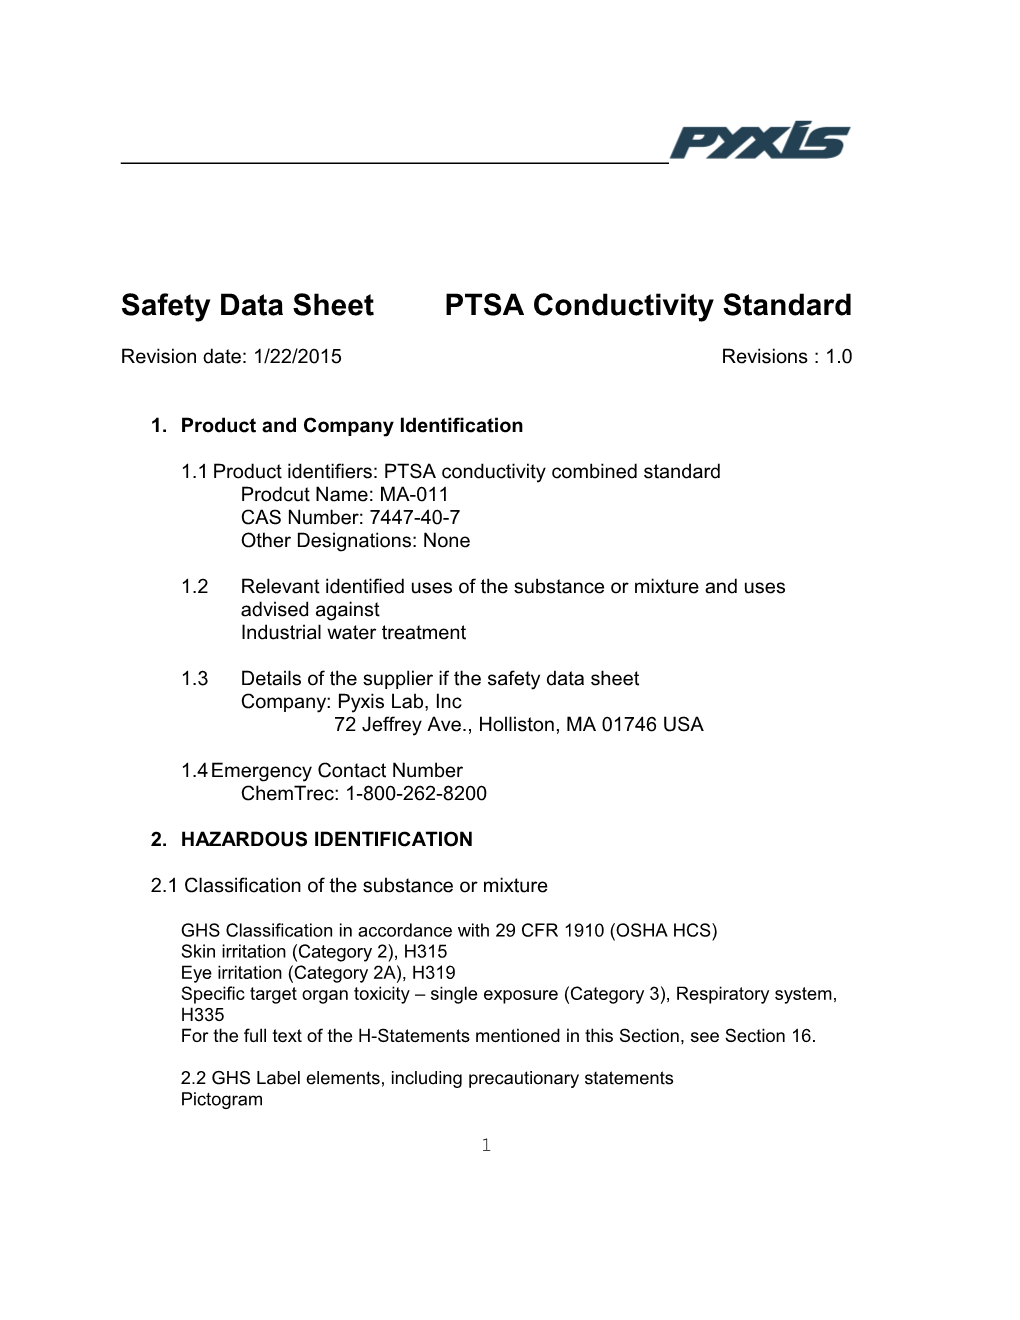 Material Safety Data Sheet Issue Date: 04/09/02